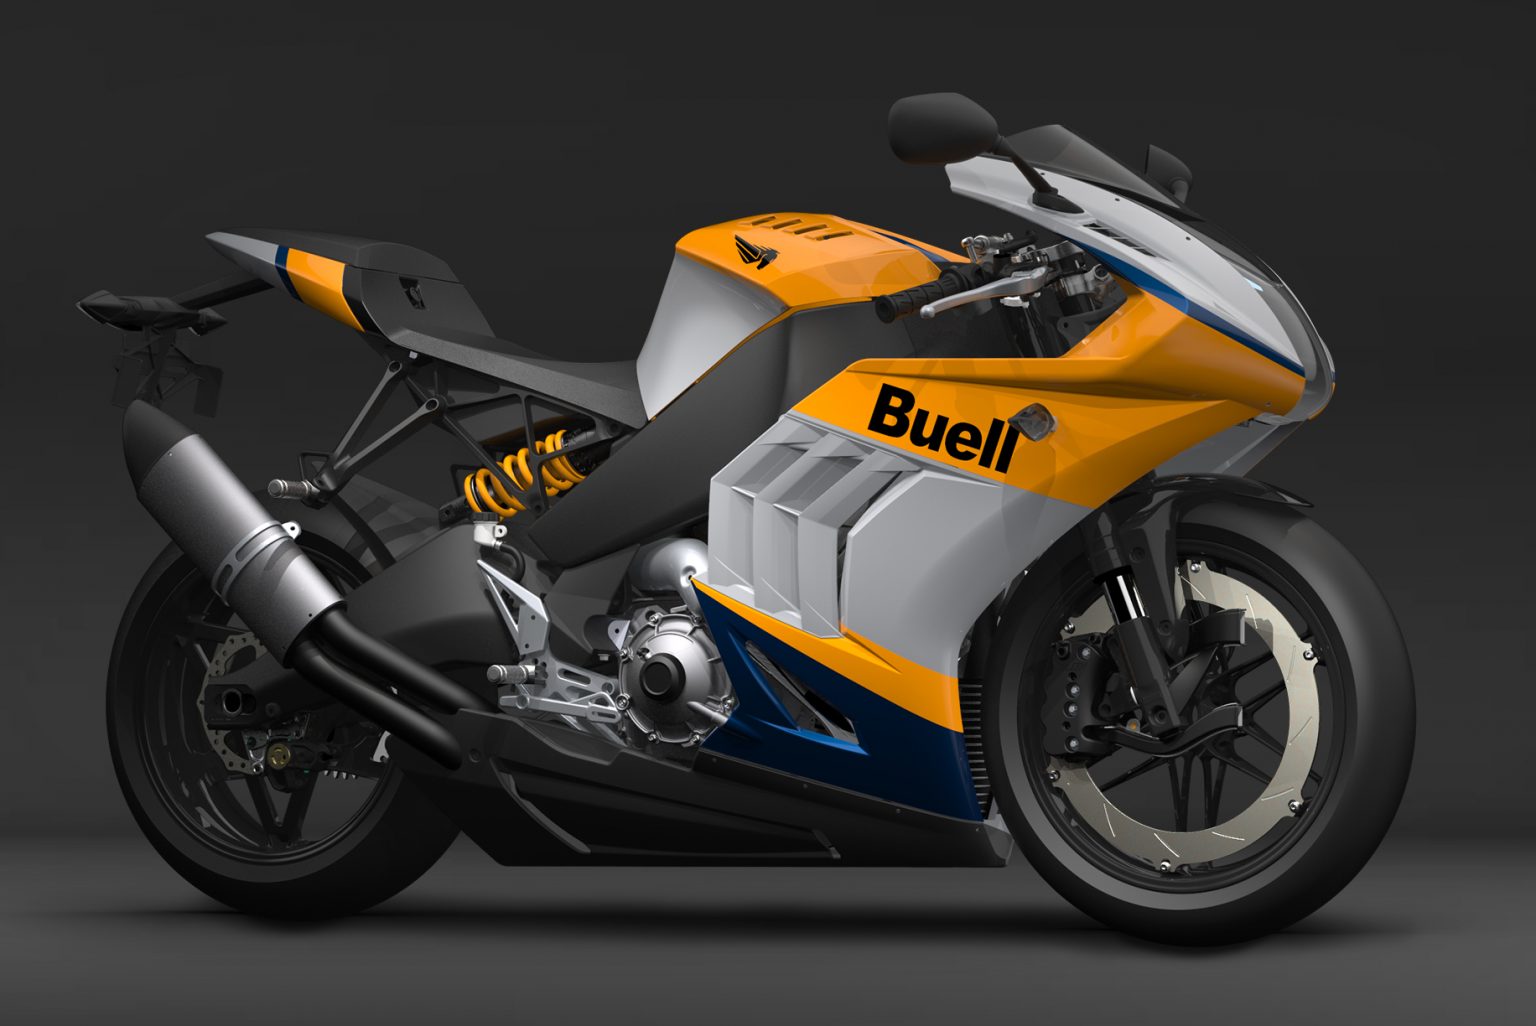 Buell Back In Production With 10 Models Planned